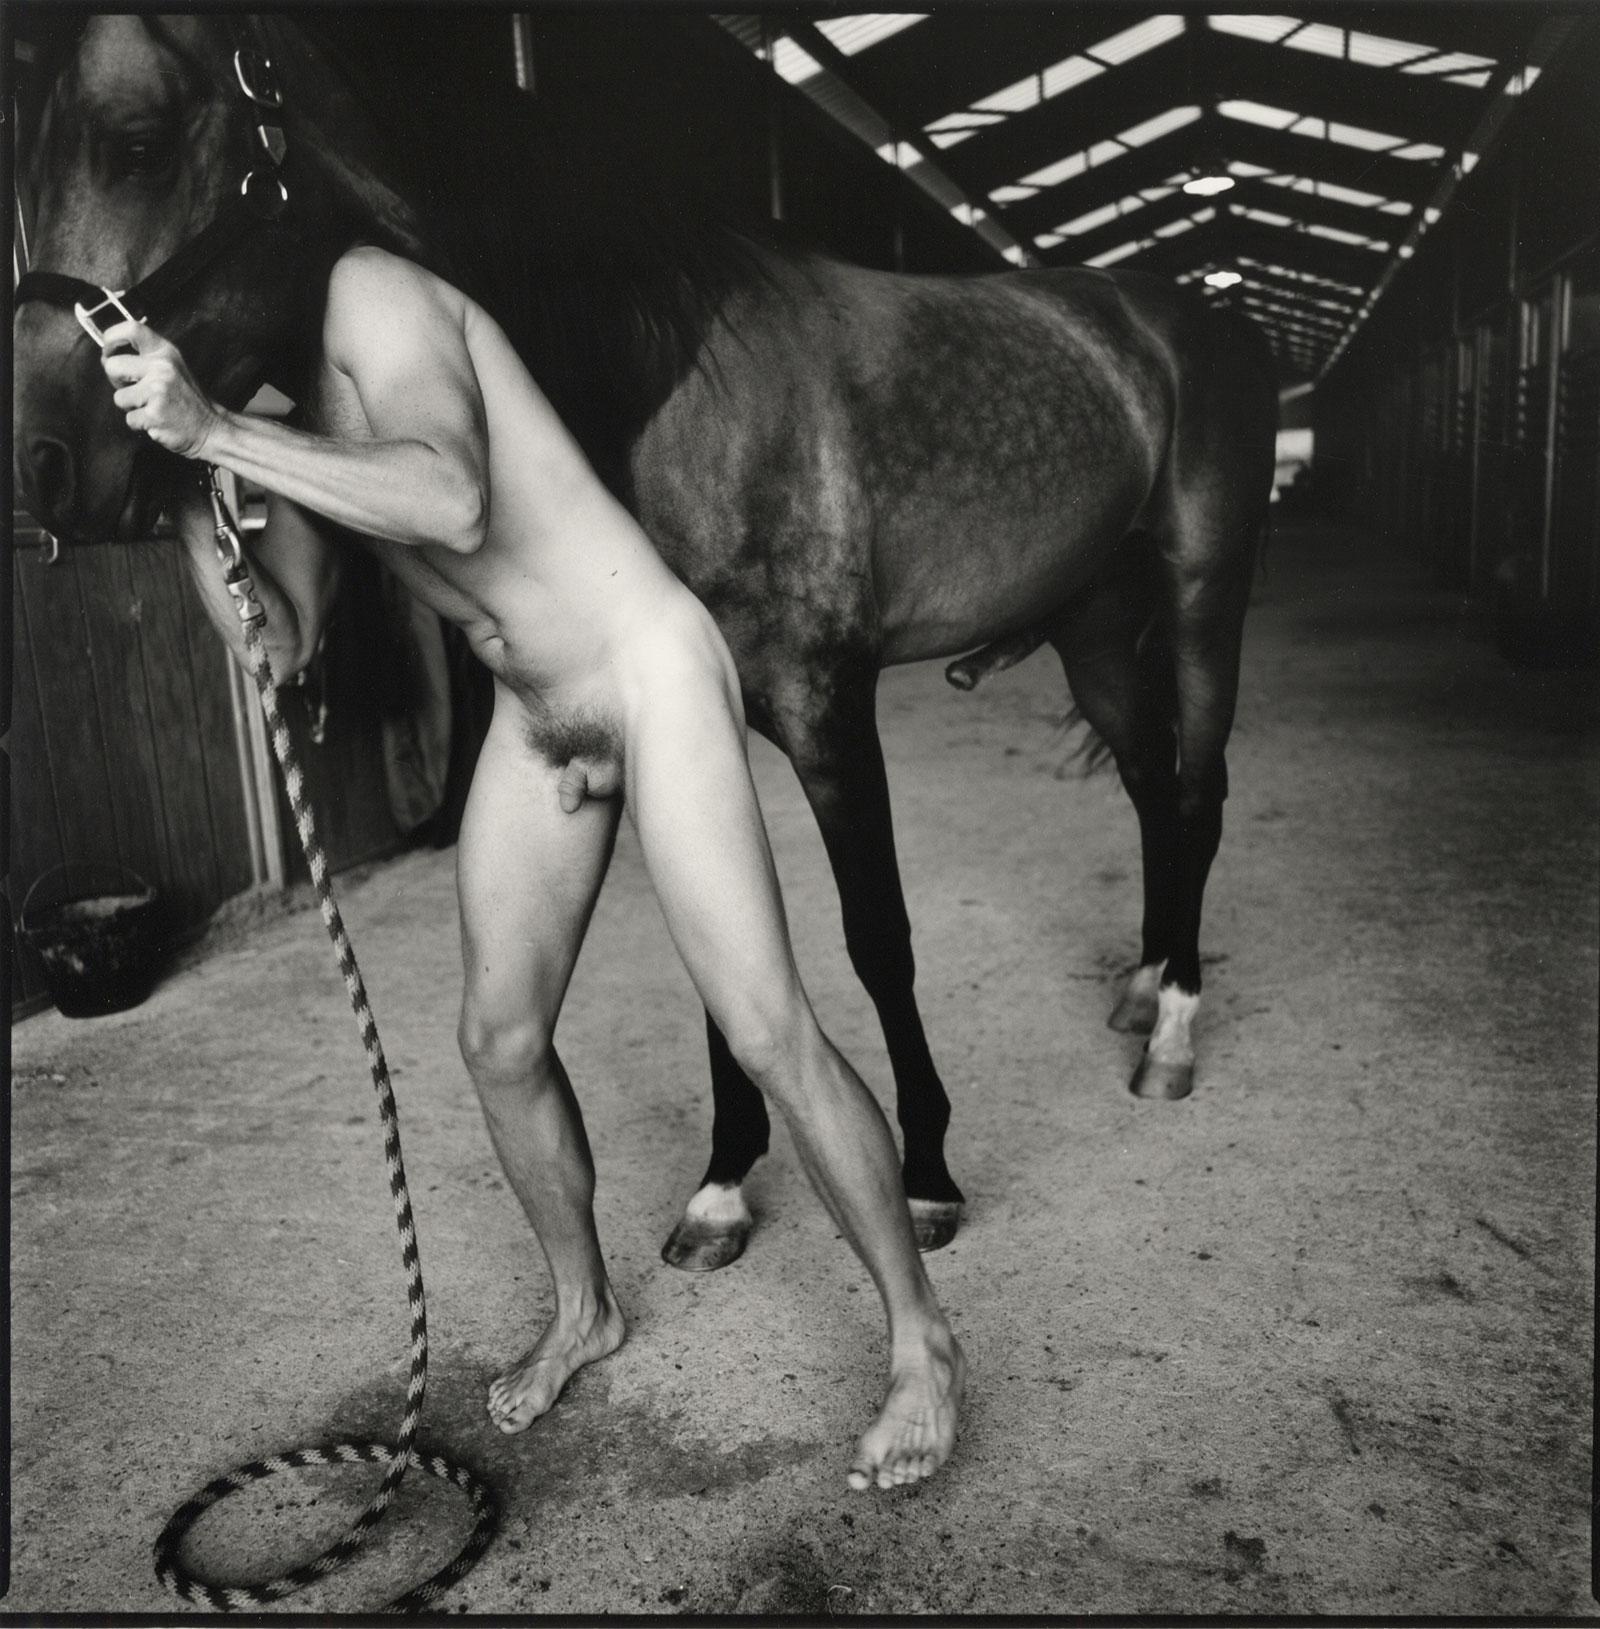 Arthur Tress Nude Photograph - Centaur (mythological creature with a upper human body and lower body of horse)